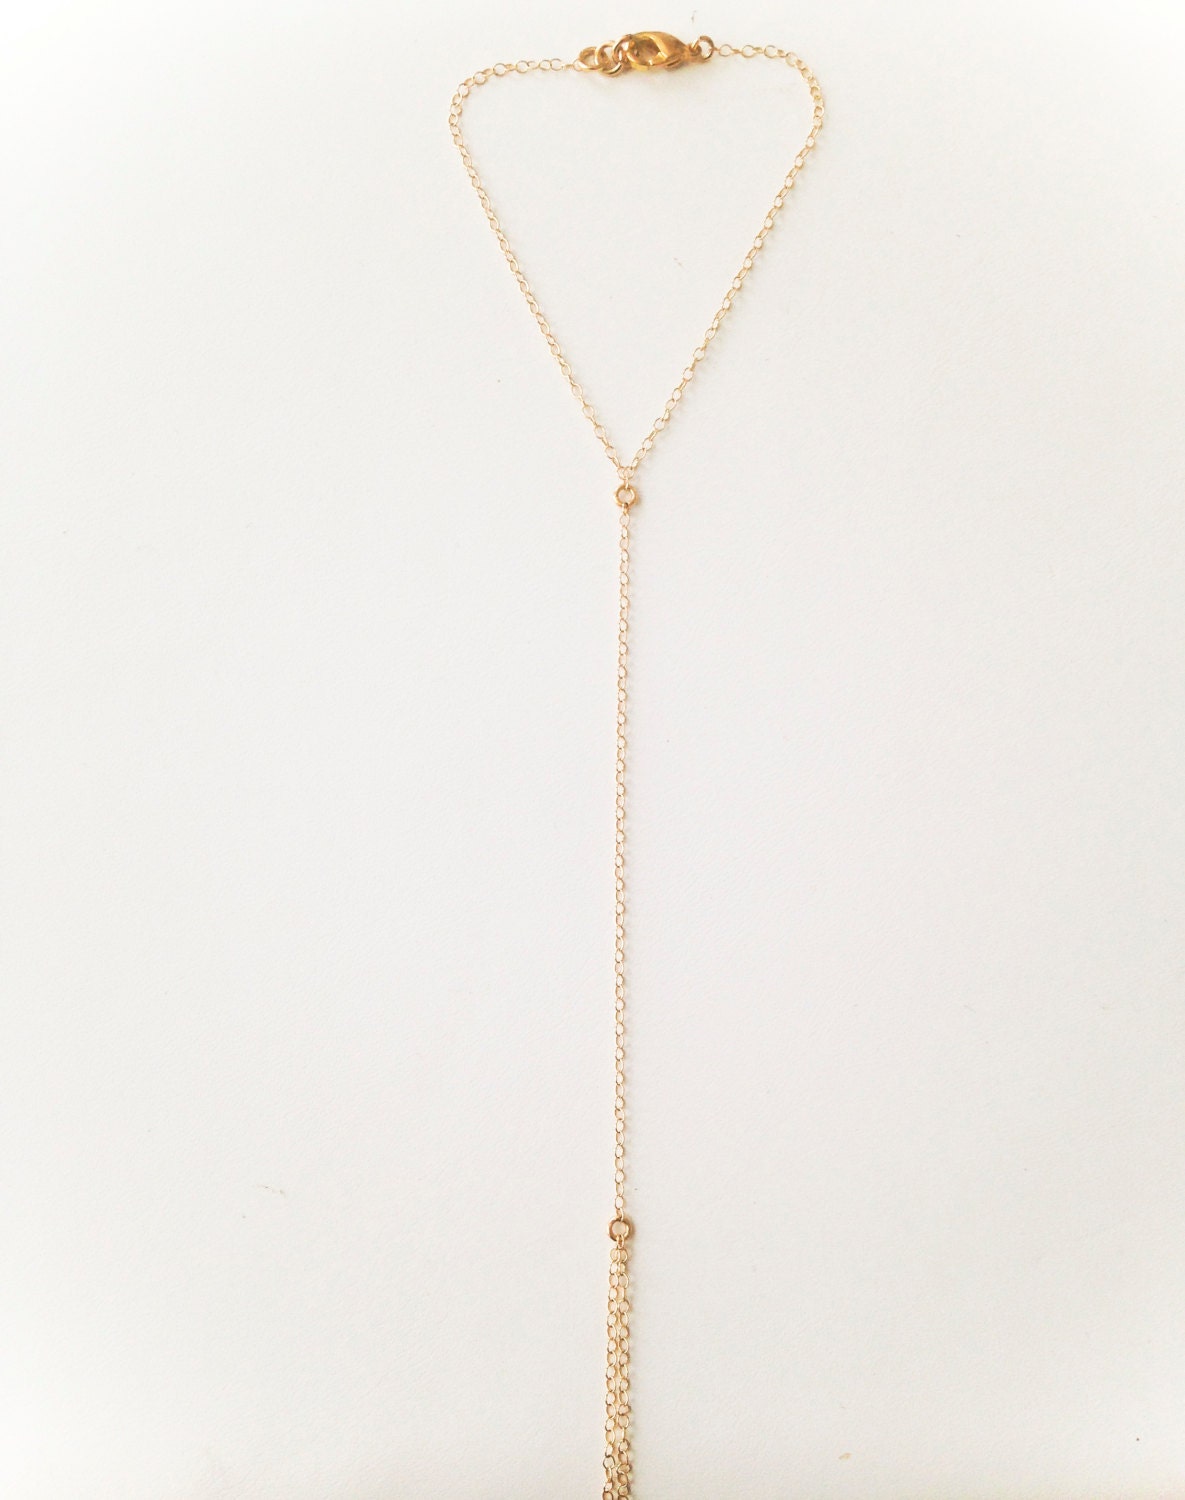 14KT Gold Filled Hand Chain // Everyday Jewelry Dainty - Etsy